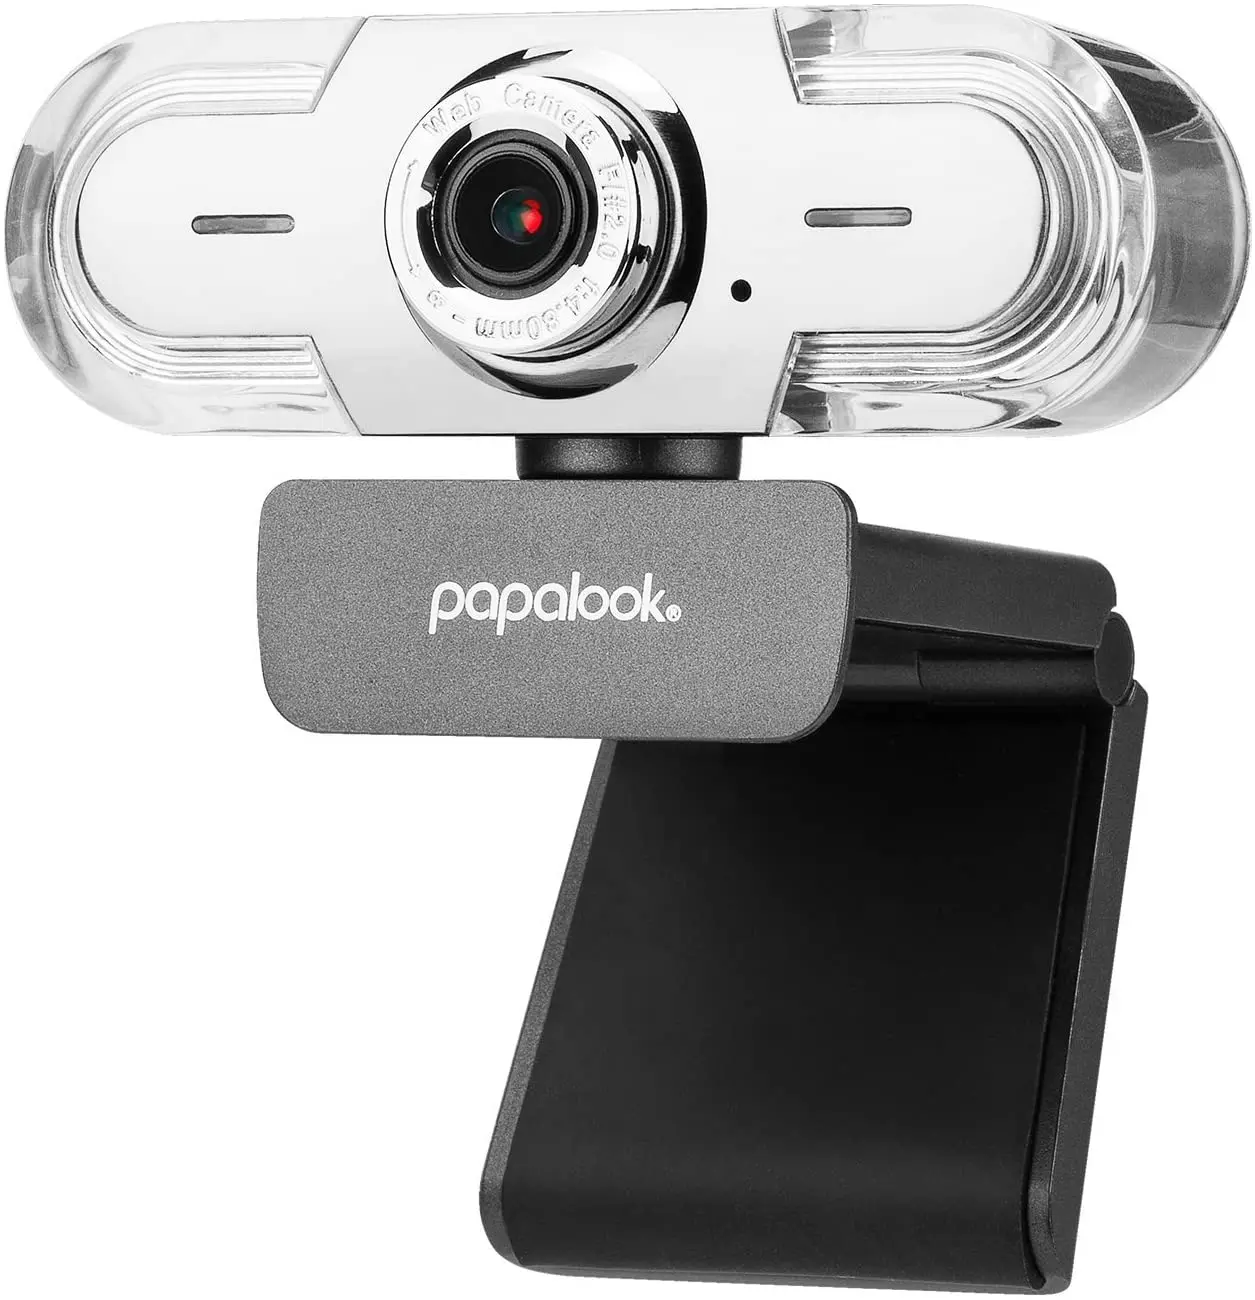 

papalook PA452 Pro Webcam 1080P with Microphone Full HD PC Web Camera for Video Calling Manual Focus and USB Camera for Desktop